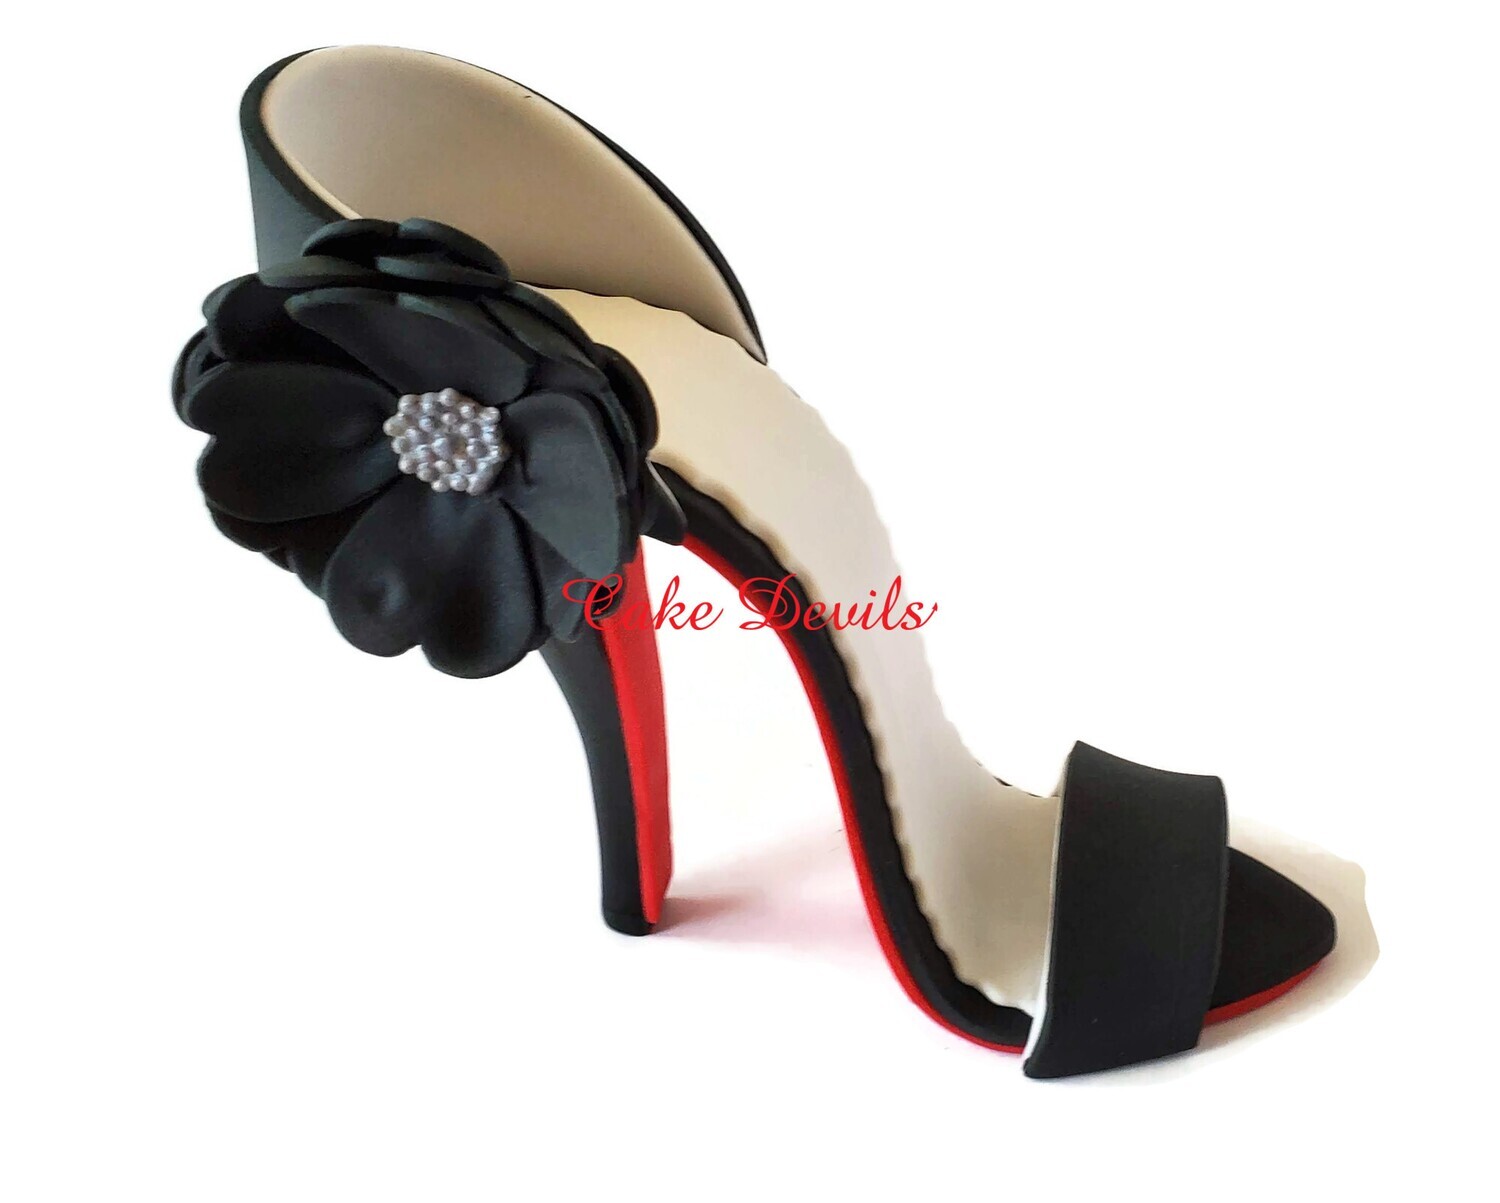 High Heel Shoe with Flower Fondant Cake Topper, Fondant Stiletto heel with lace embroidery